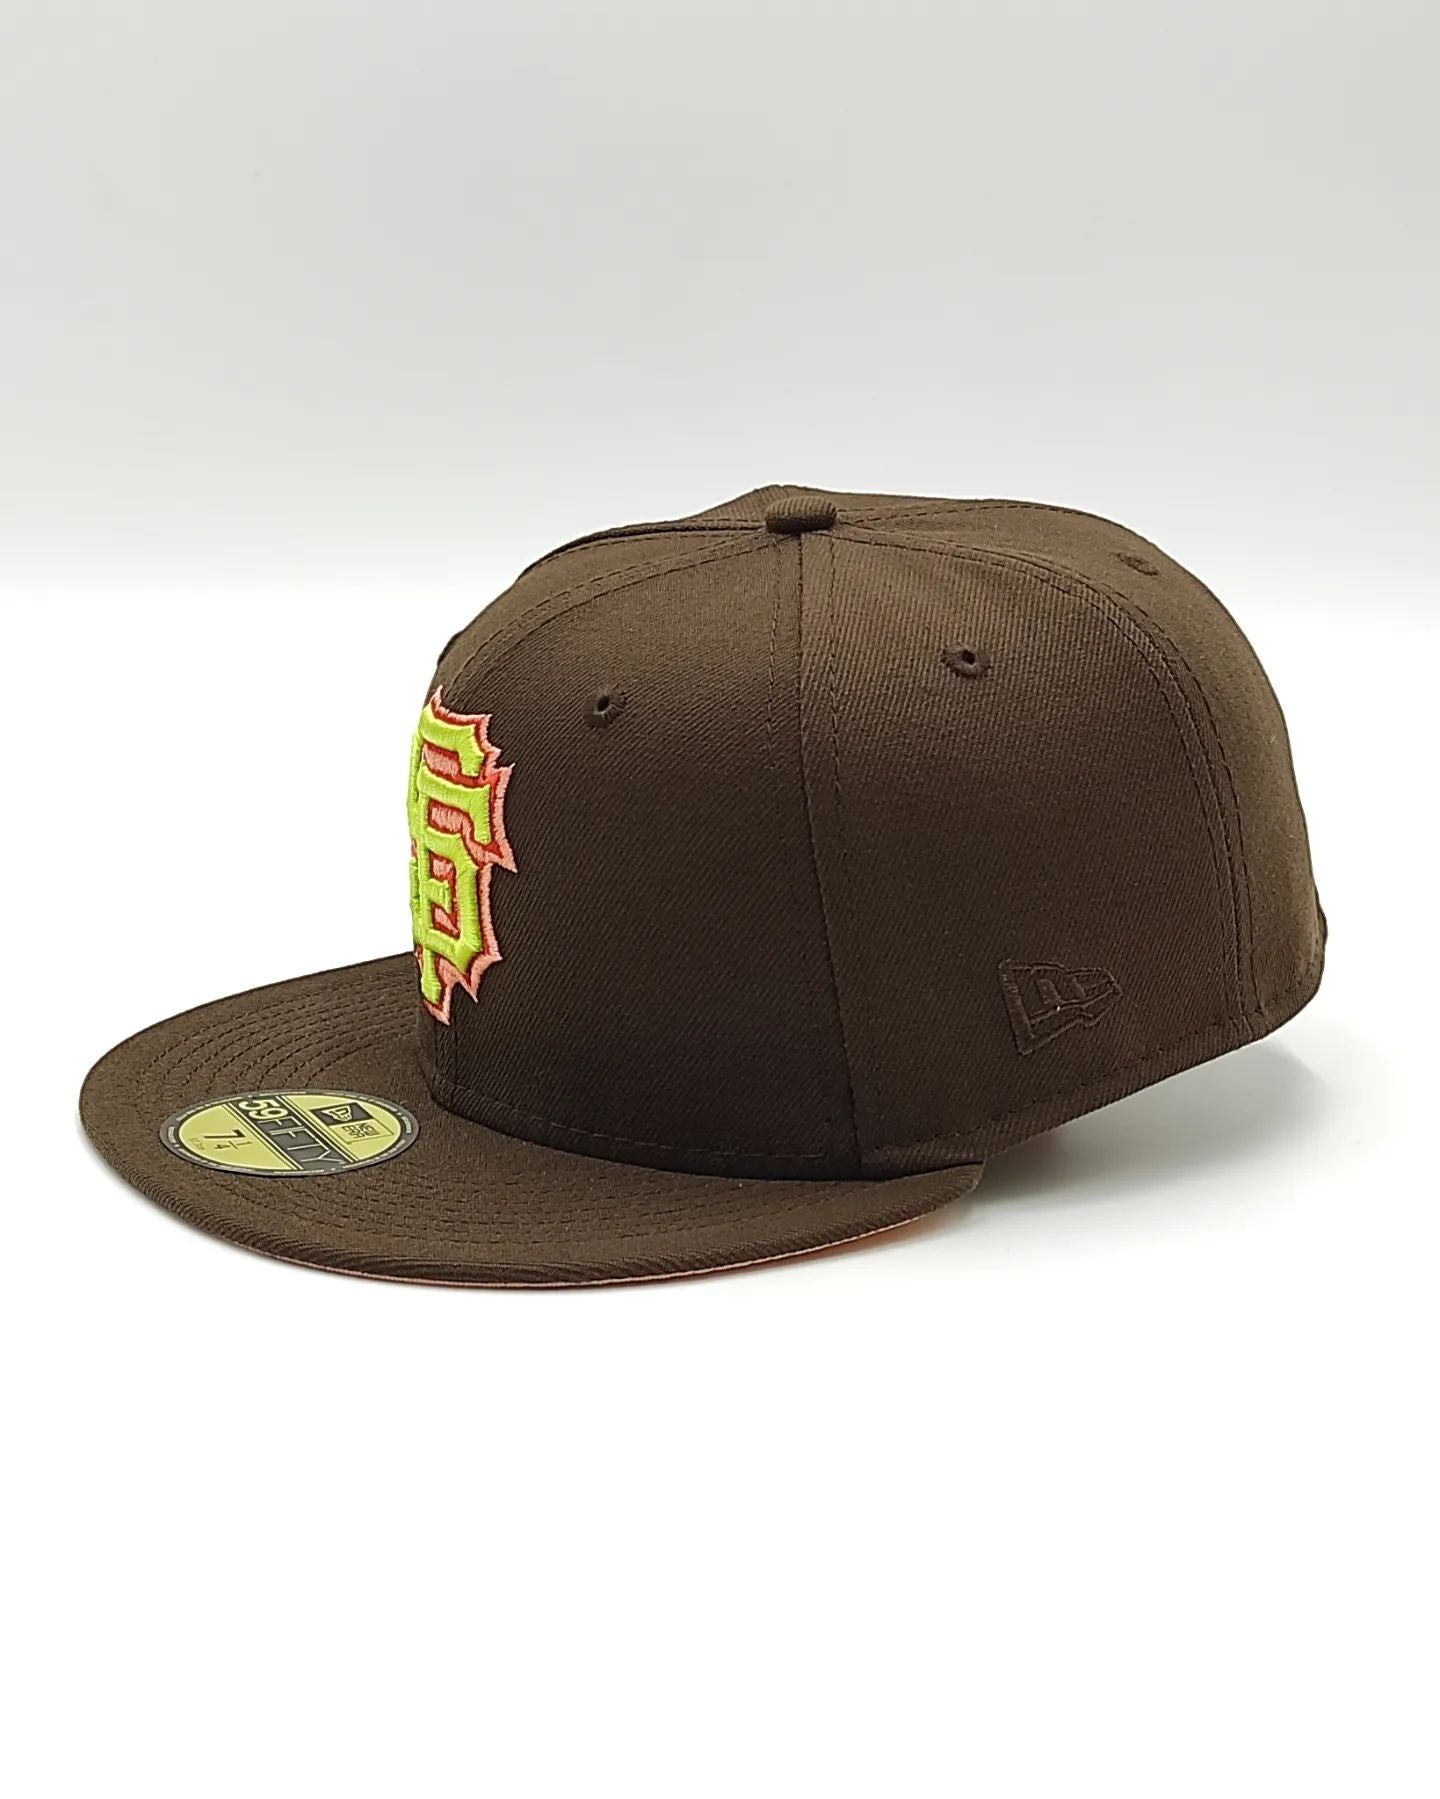 Exclusiva New Era 59Fifty Parks The Woods San Francisco Giants Battle of the Bay Patch Hat - Marron